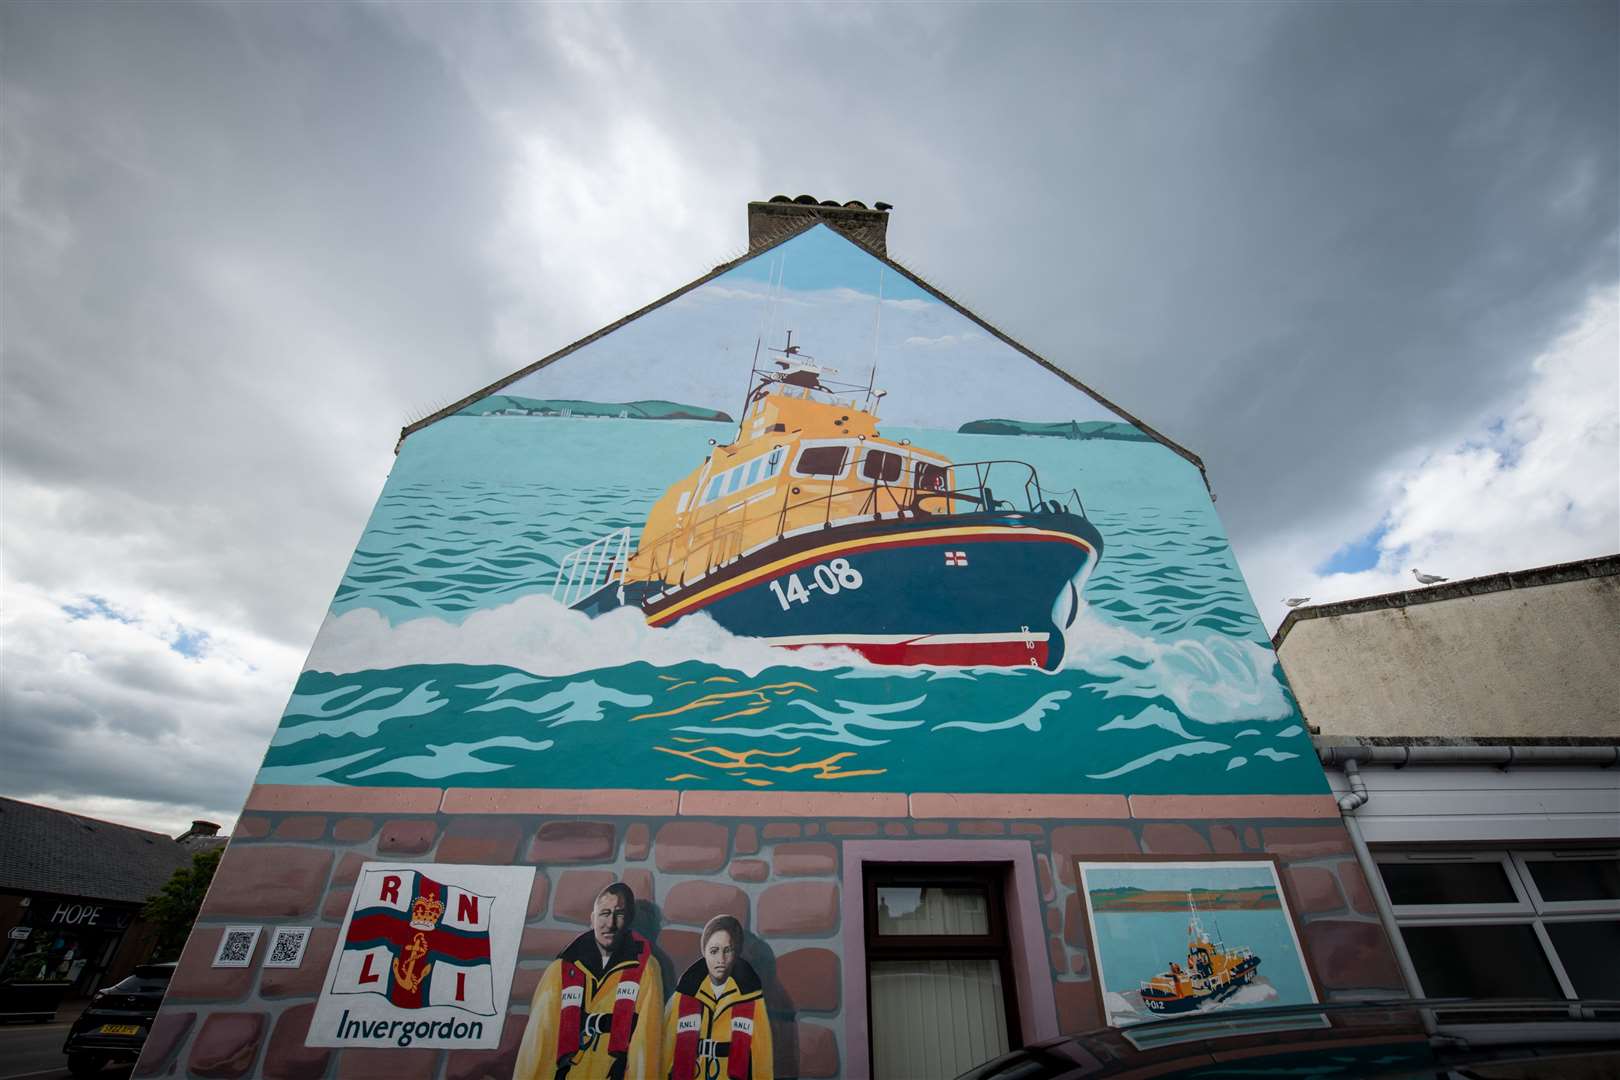 The town is fiercely proud of its RNLI lifeboat.